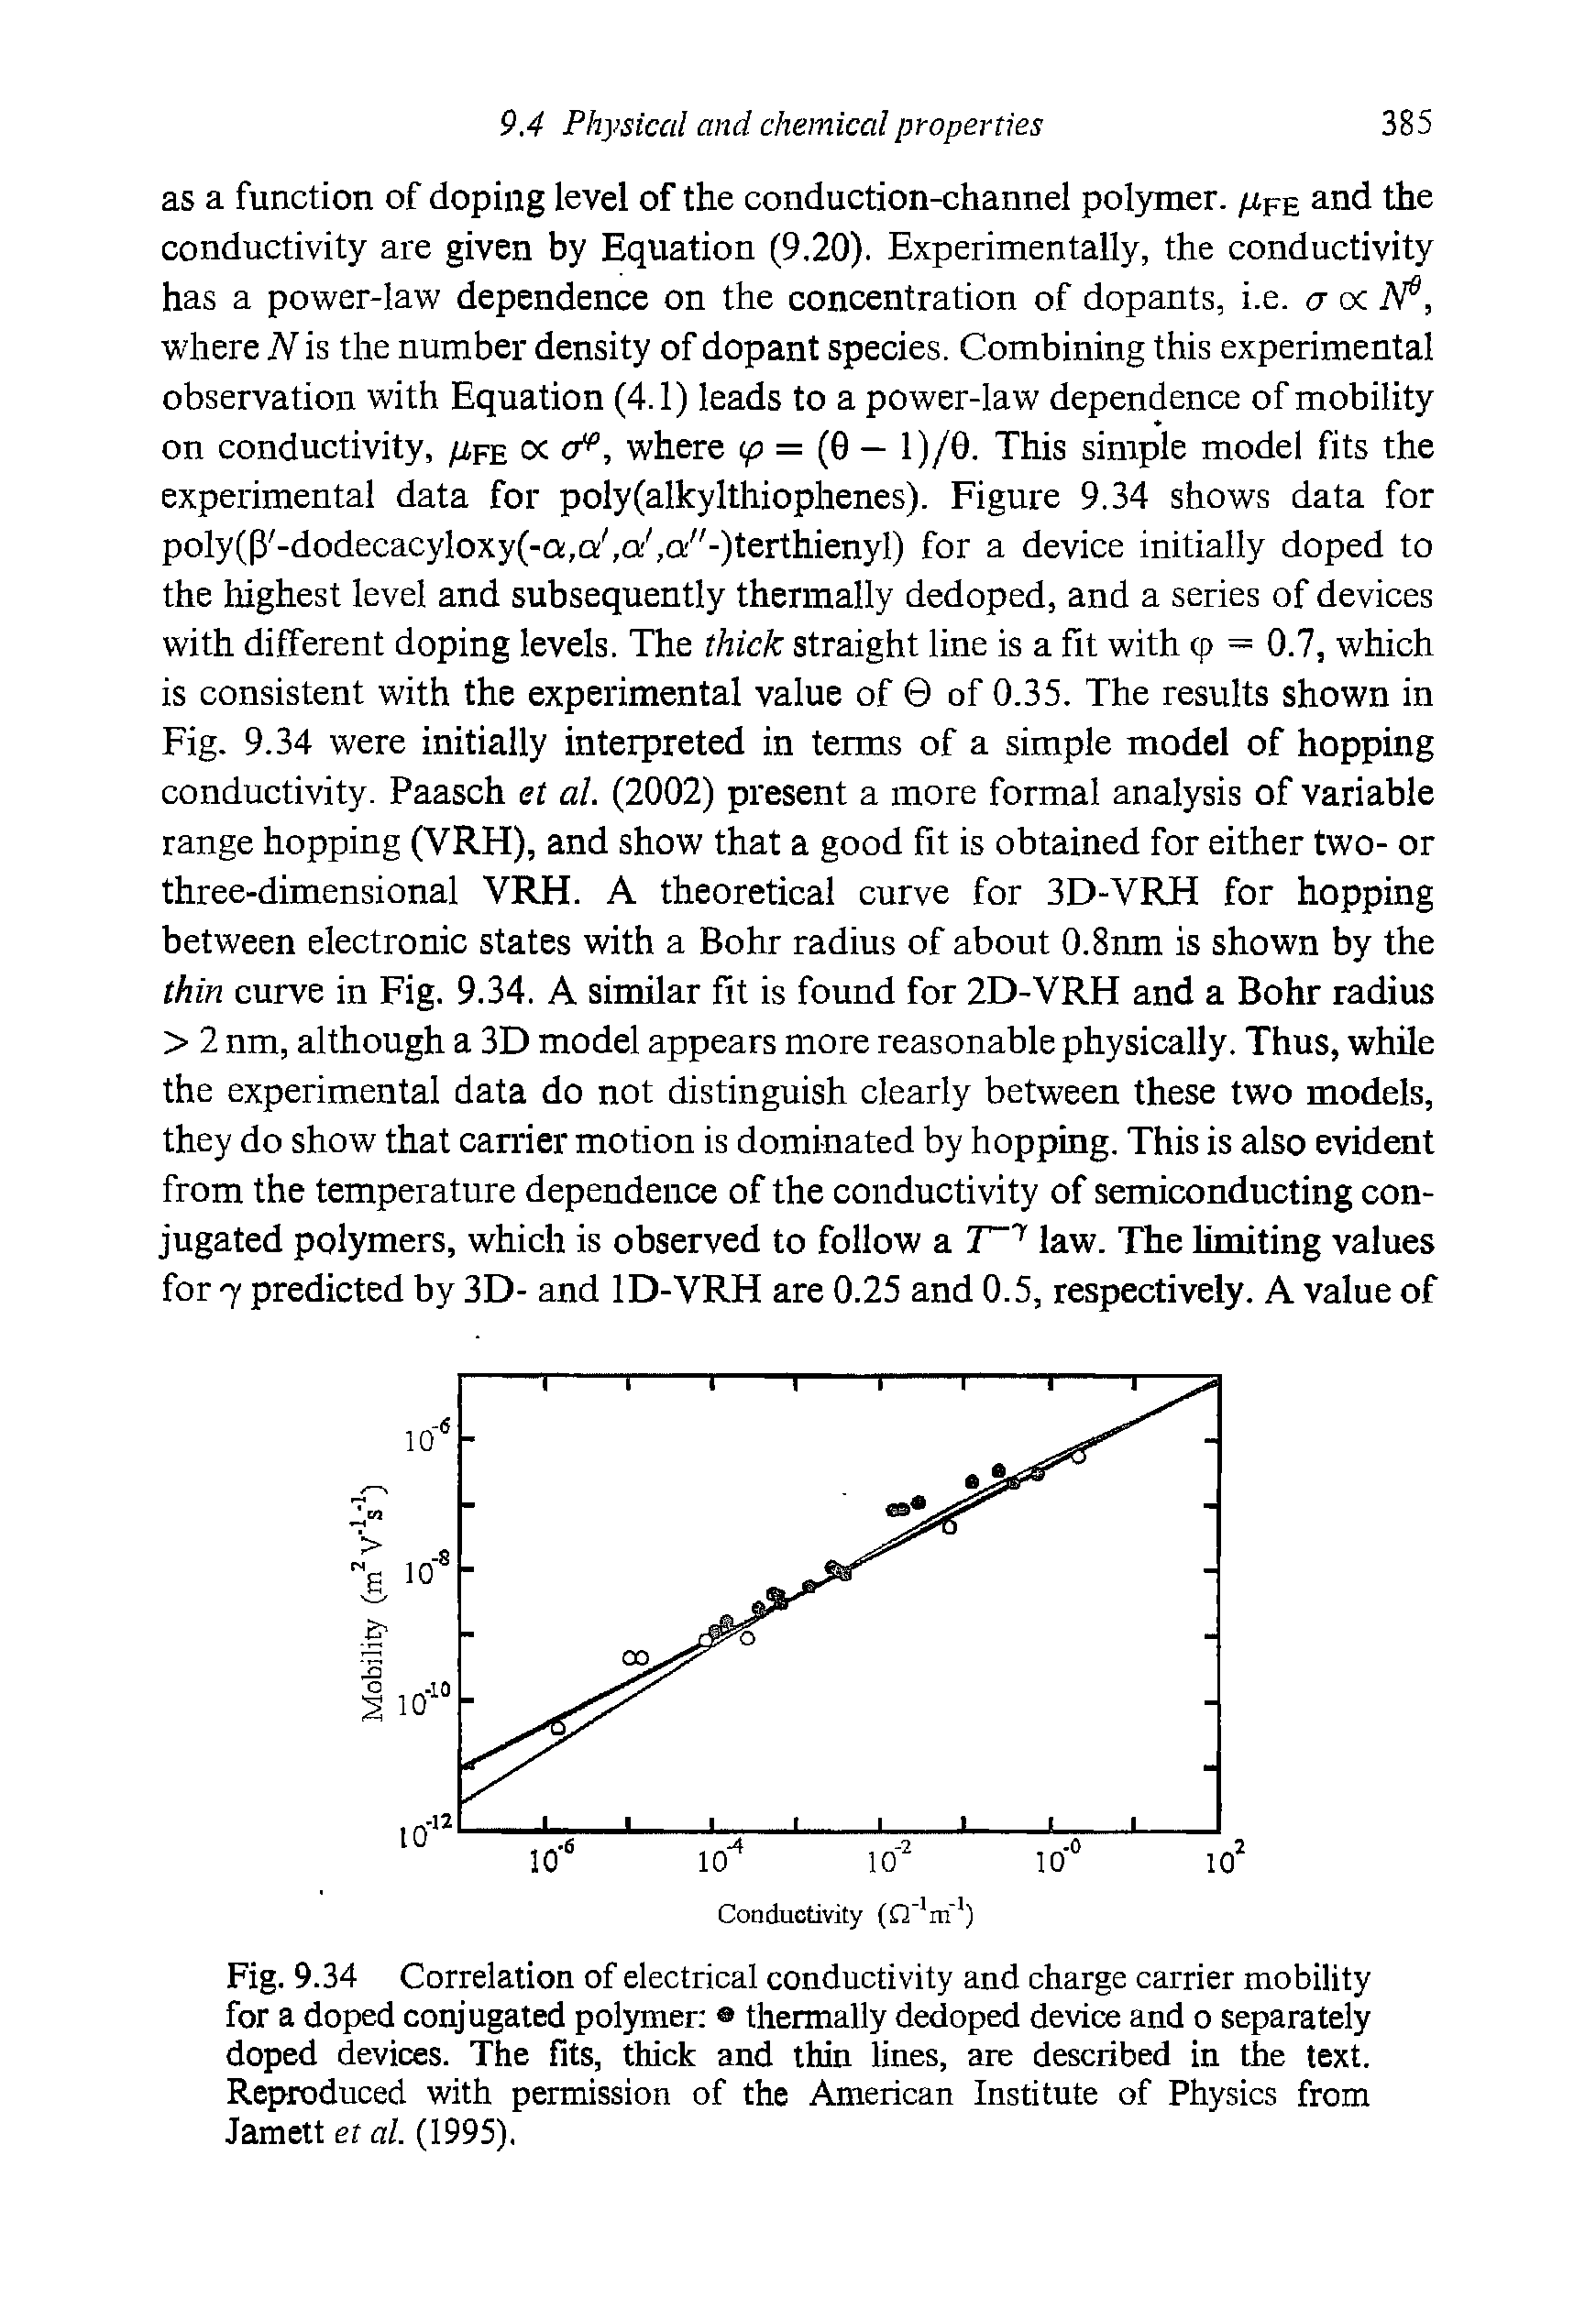 Fig. 9.34 Correlation of electrical conductivity and charge carrier mobility for a doped conjugated polymer thermally dedoped device and o separately doped devices. The fits, thick and thin lines, are described in the text. Reproduced with permission of the American Institute of Physics from Jamett et al. (1995).